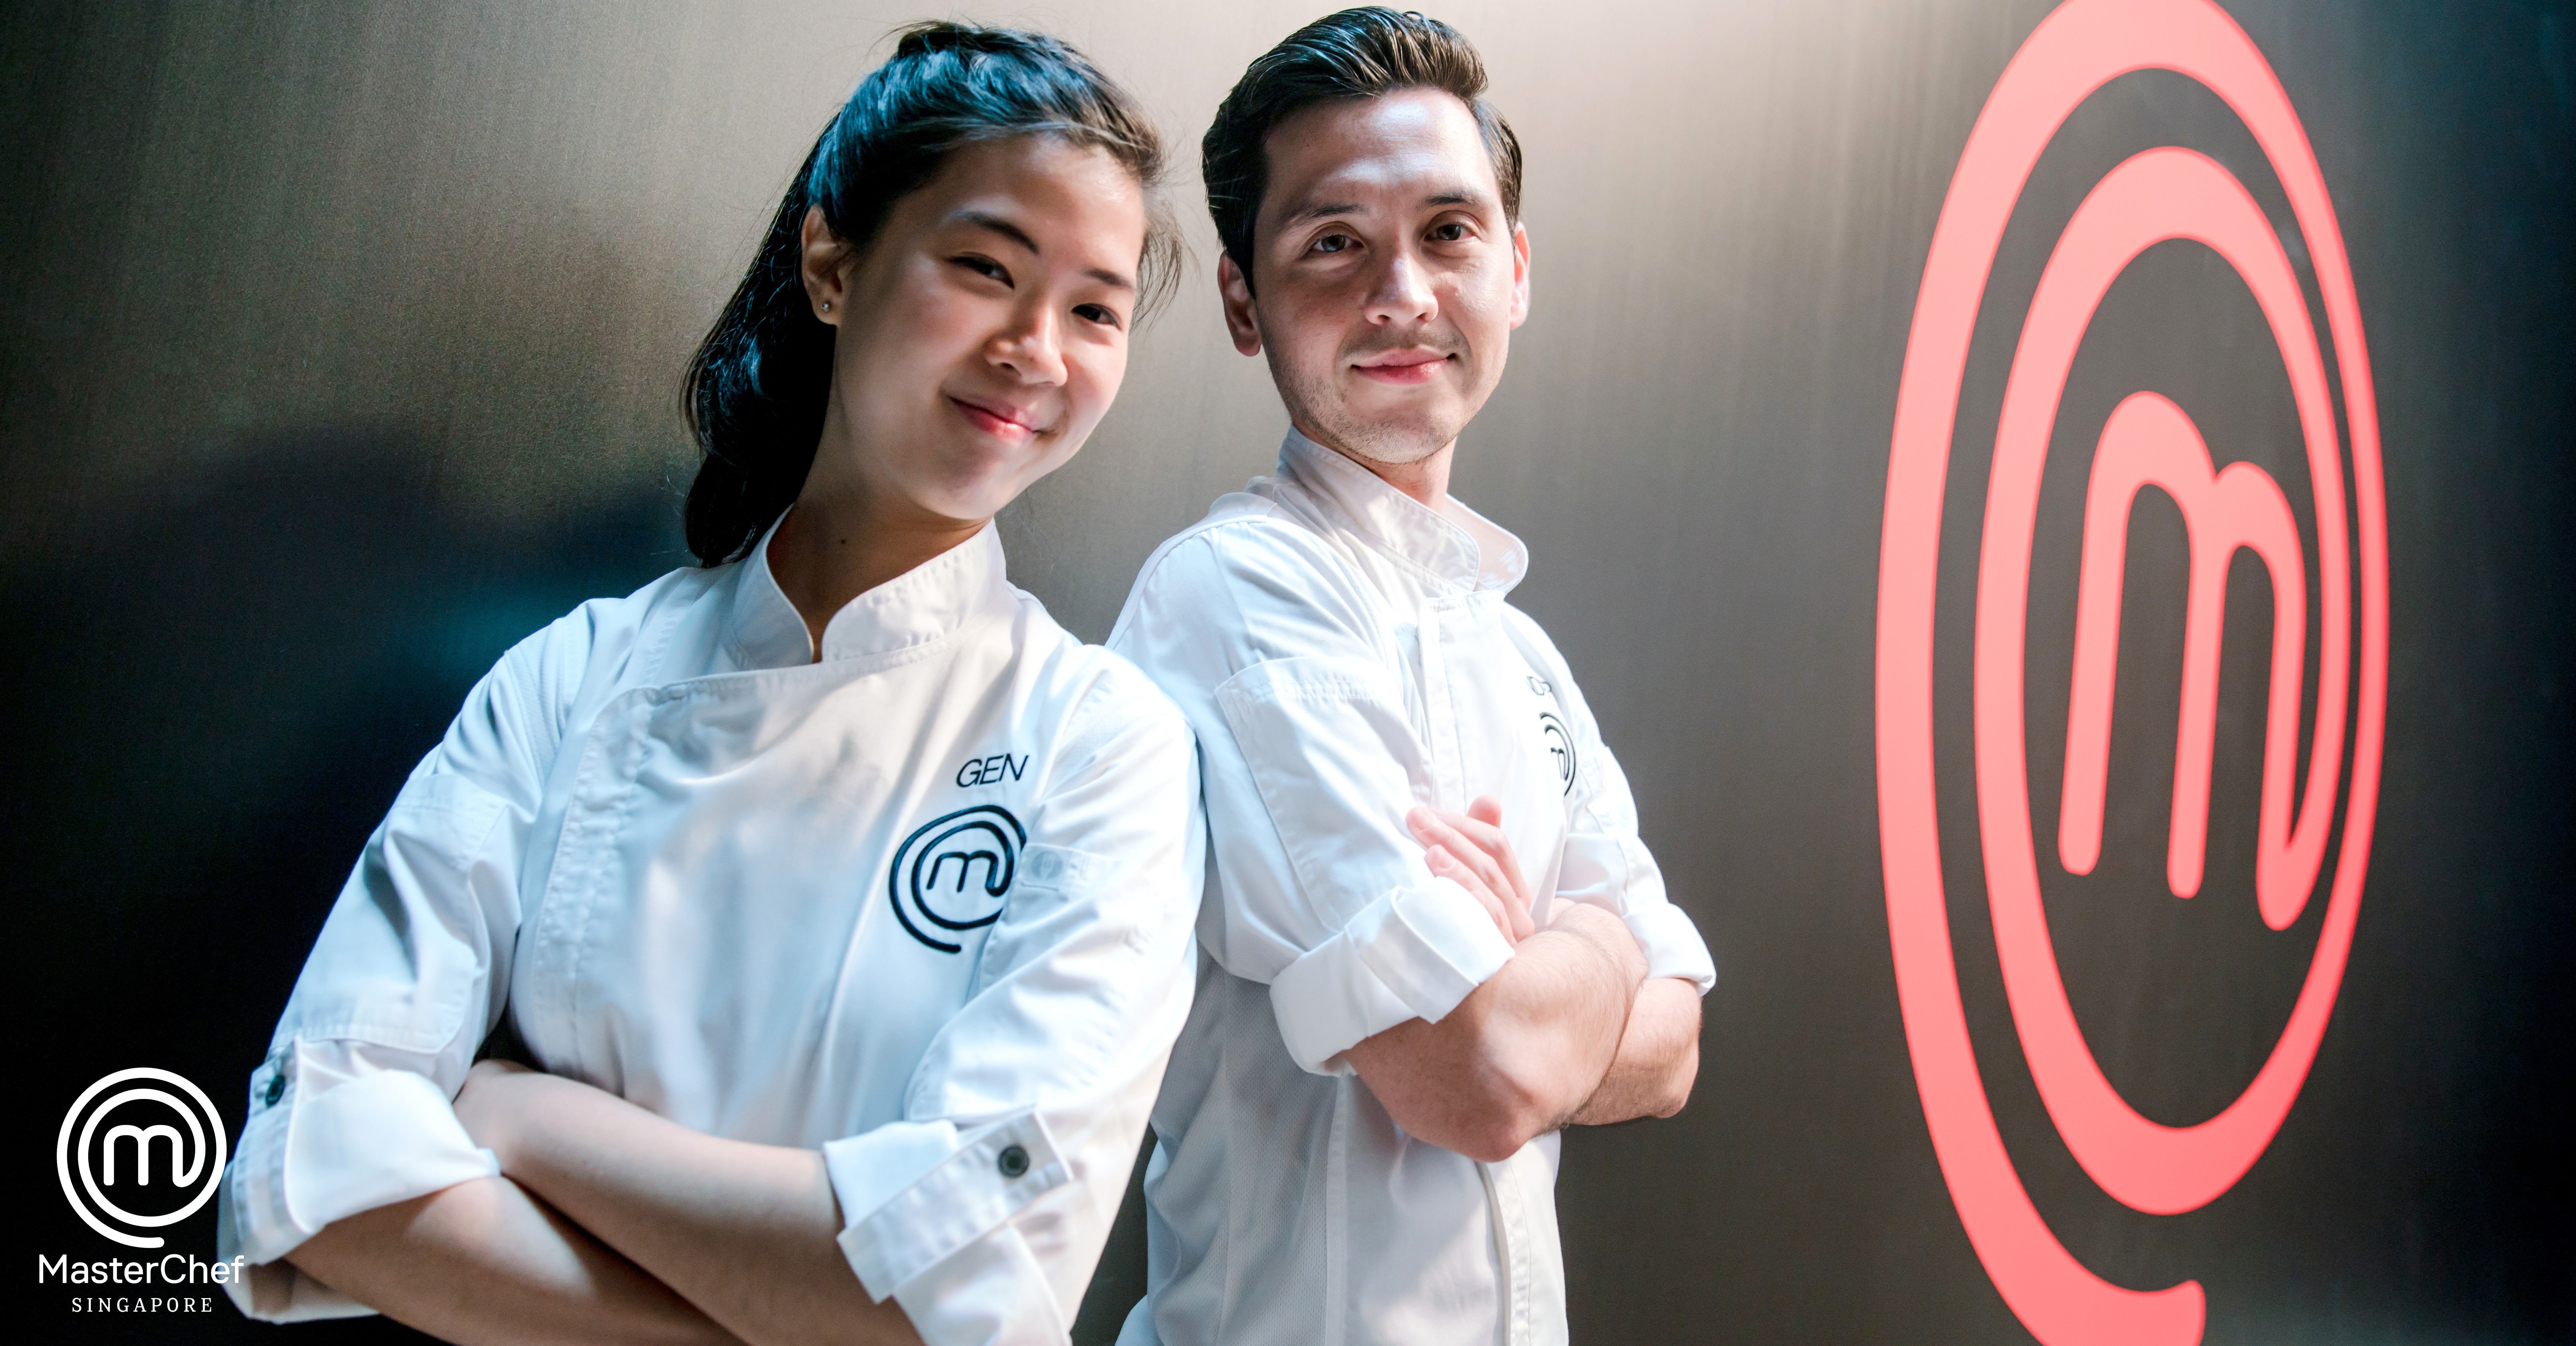 5 Cooking Contest Shows — Including MasterChef Singapore — To Binge-Watch On meWATCH This Weekend